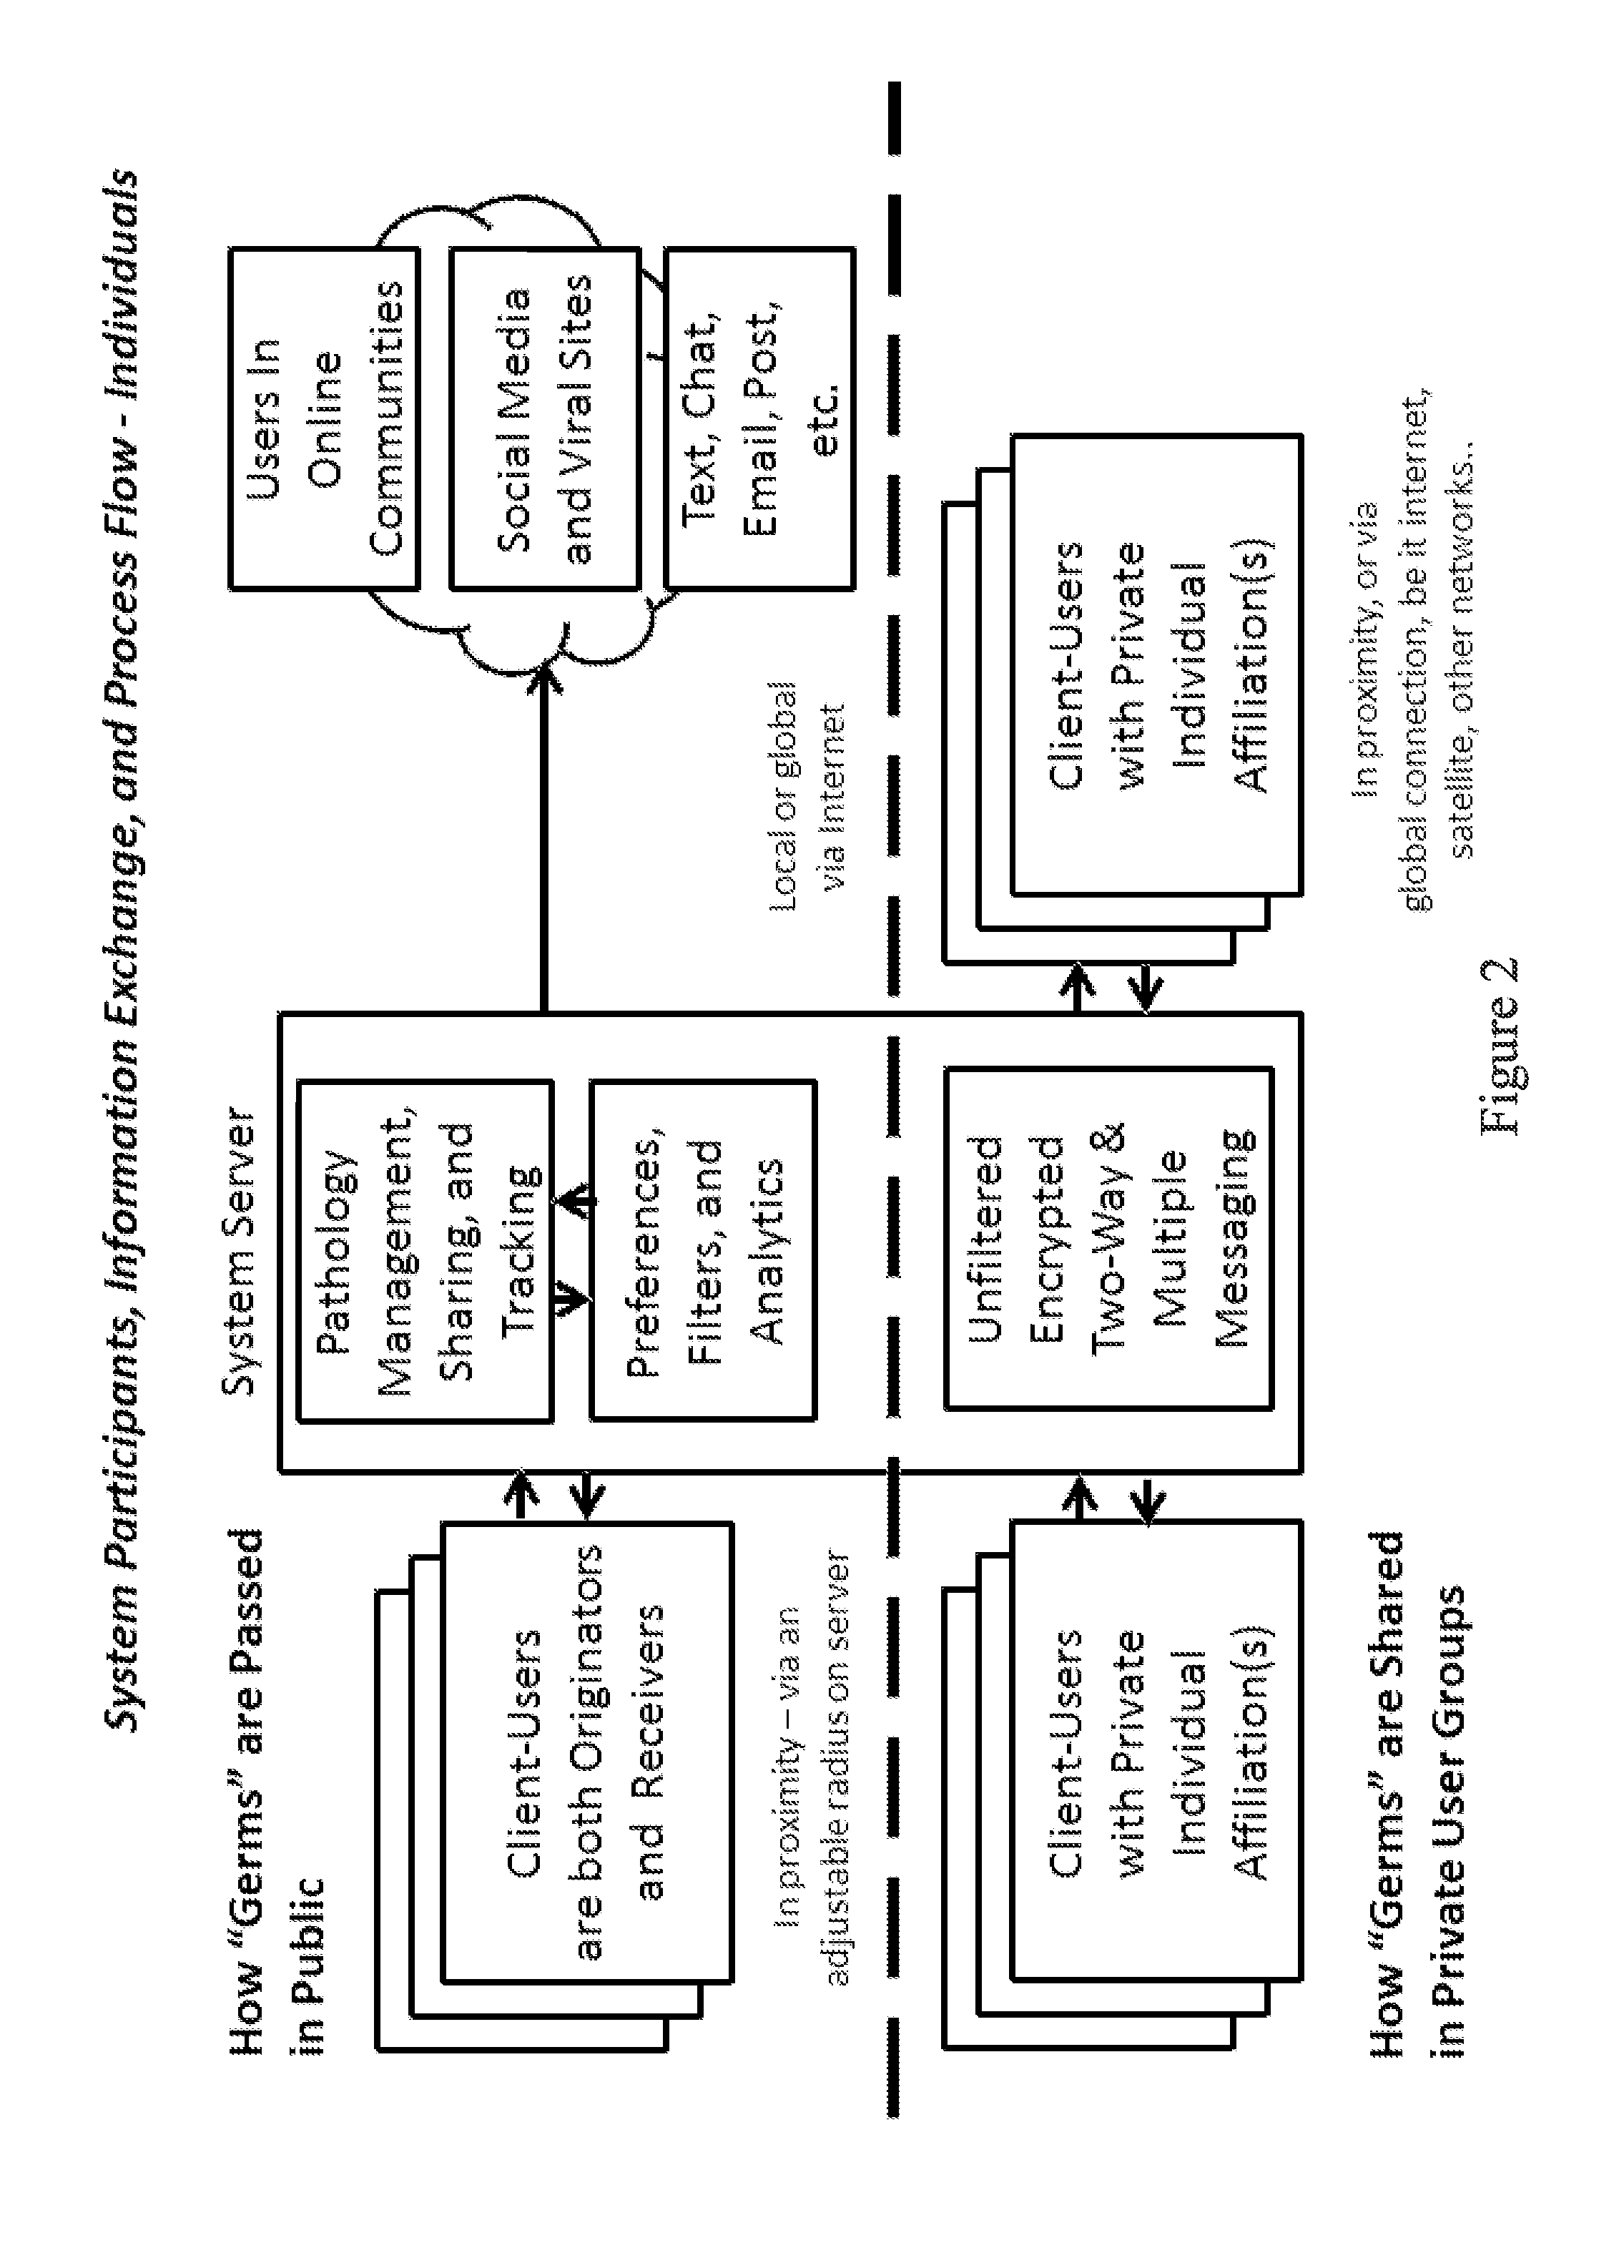 Method and apparatus to anonymously communicate encrypted content between mobile devices in proximity and in expanded user communities in a contagious, viral manner